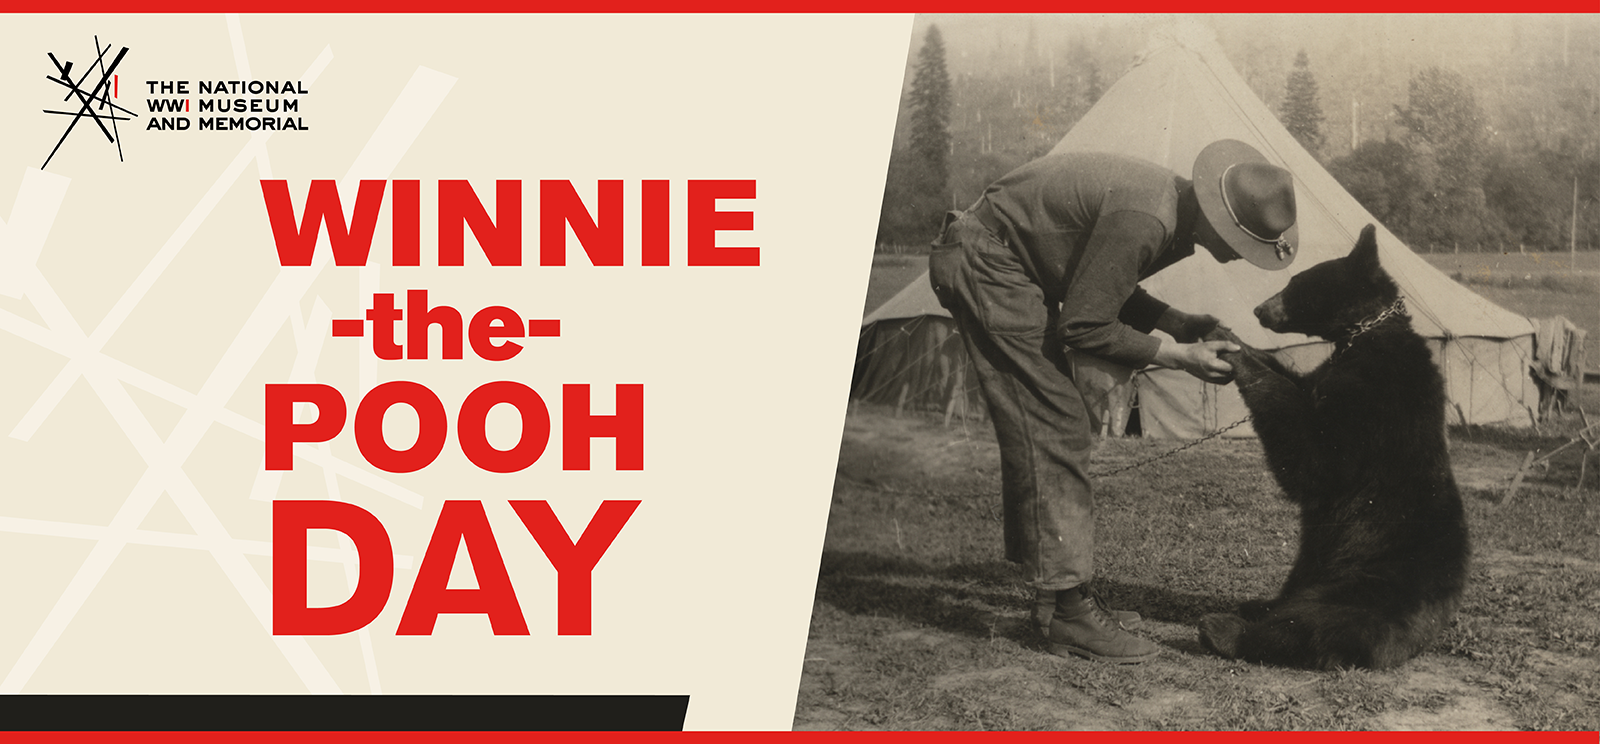 Image: black and white photo of a man in WWI uniform bending over to shake the paw of a smallish black bear. Text: 'Winnie-the-Pooh Day'